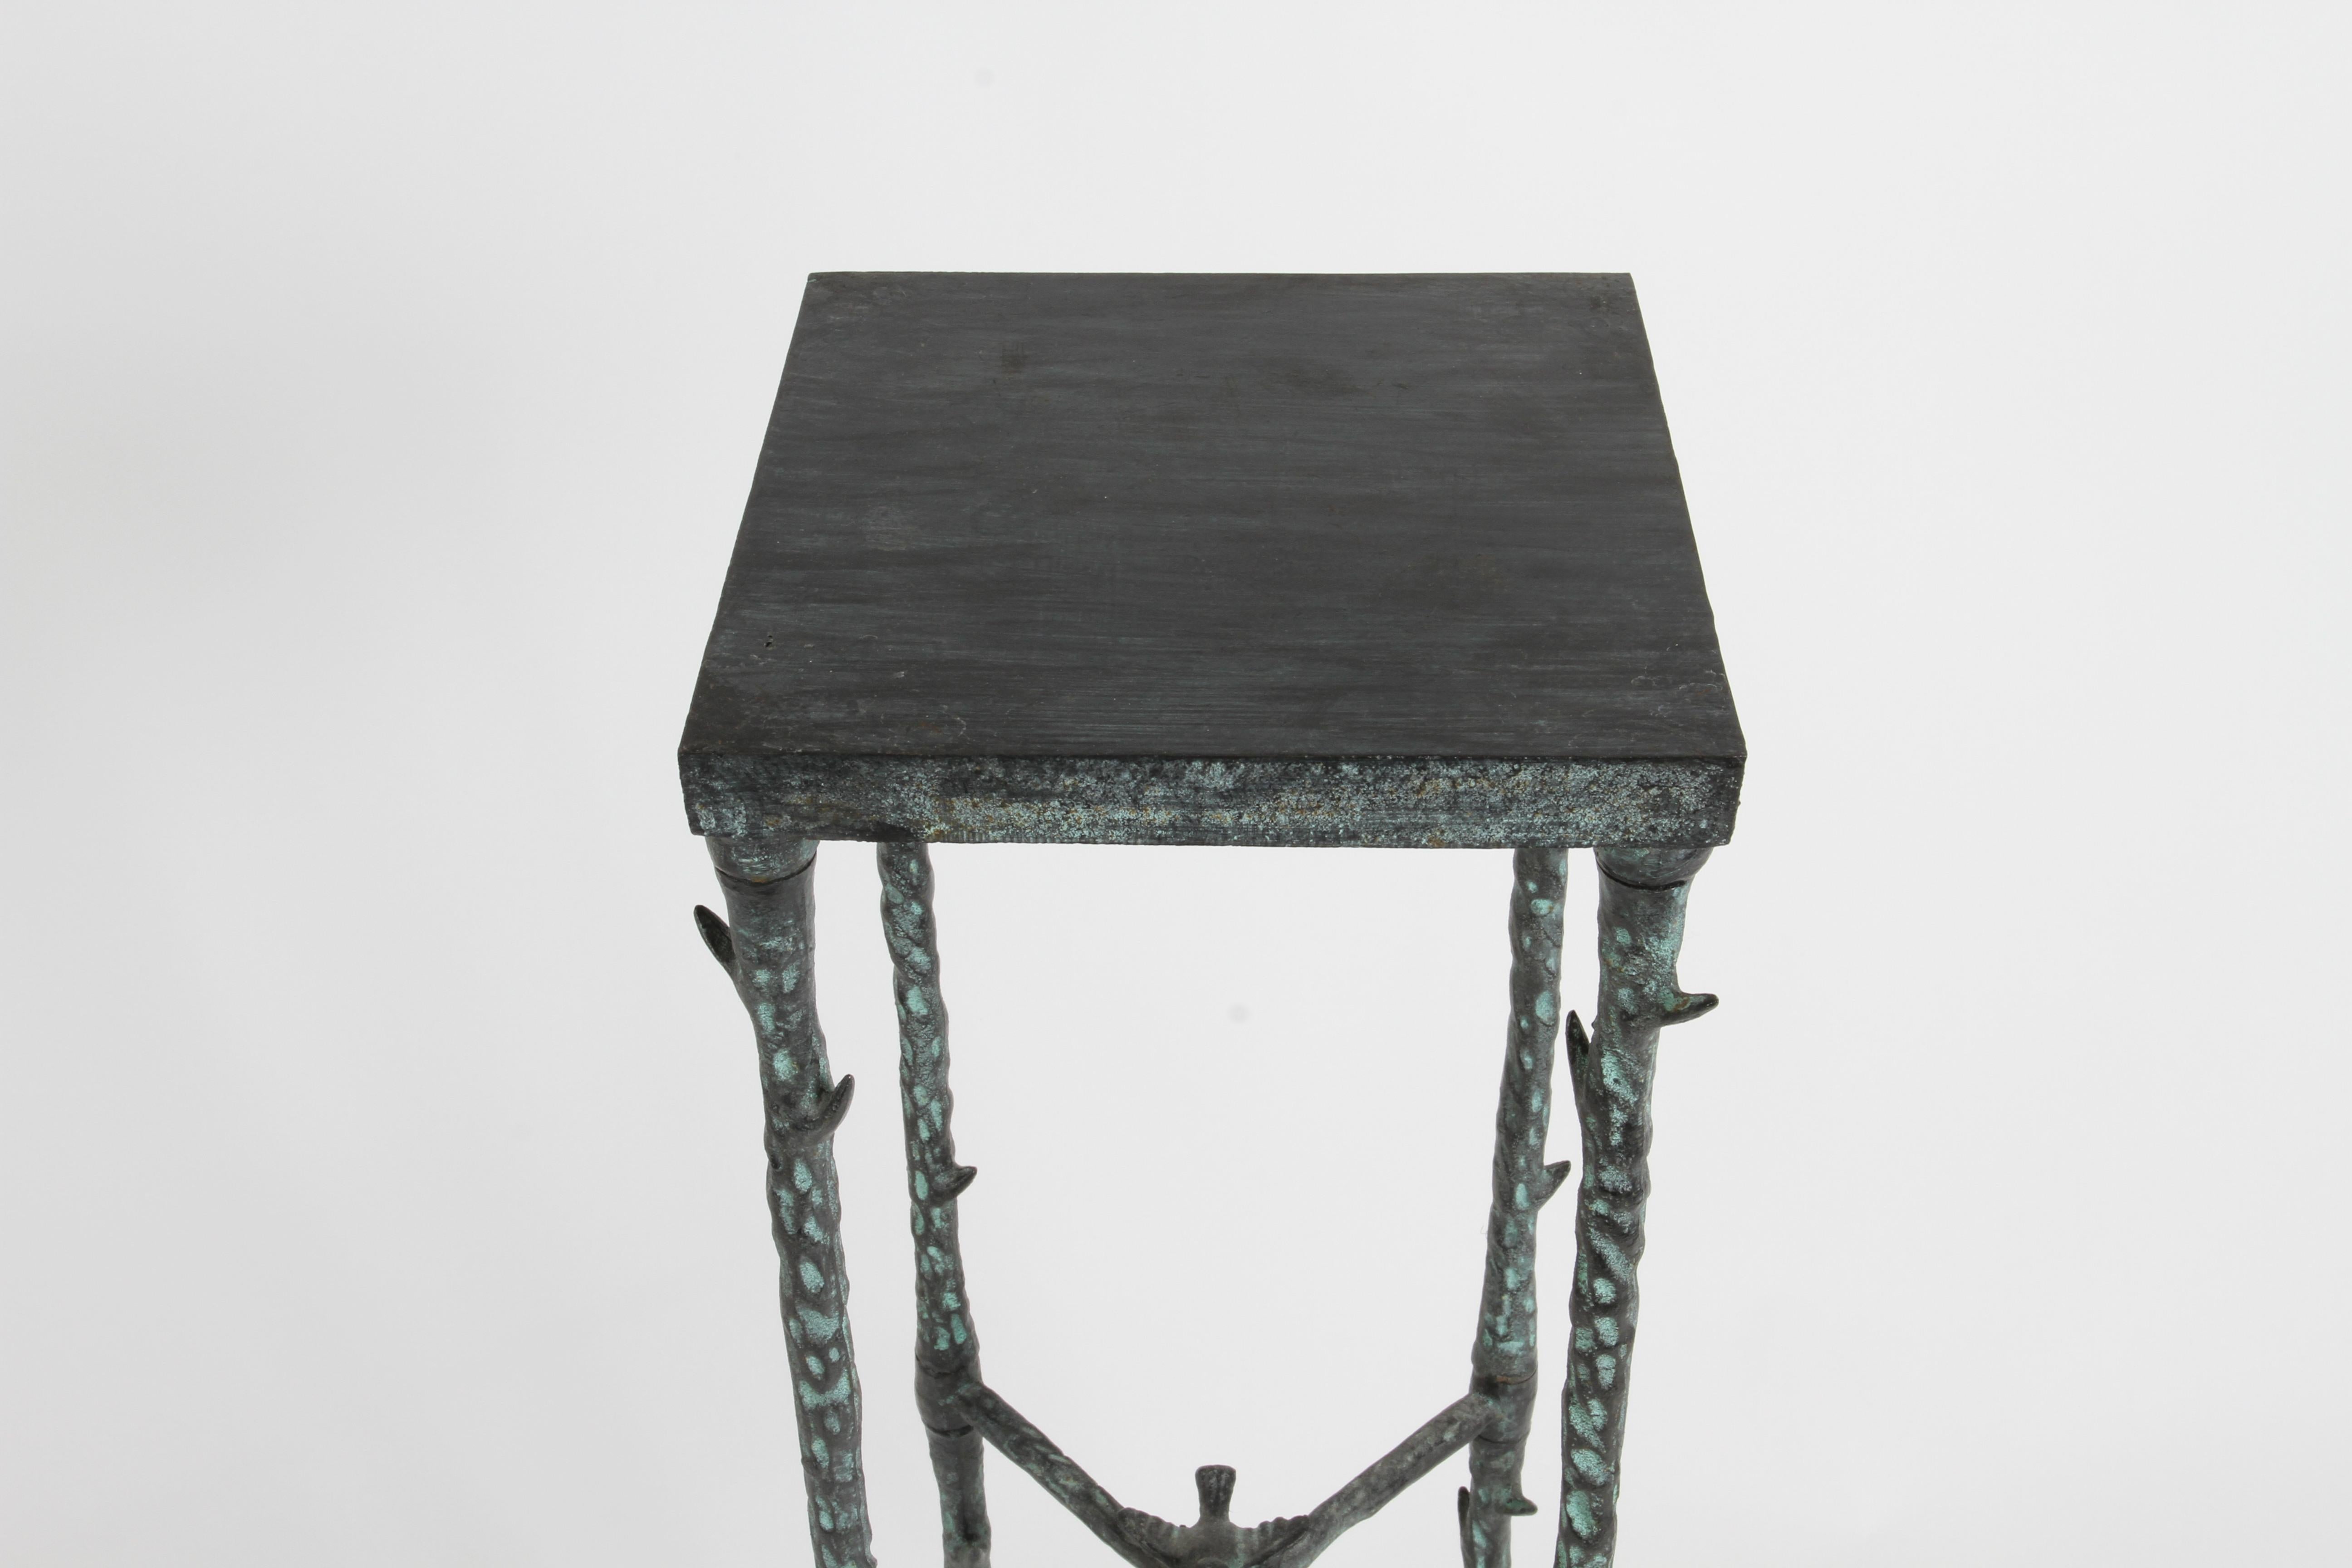 Patinated Giacometti Style Hammered Faux Bronze Finish Pedestal with Thorns and Bird Motif